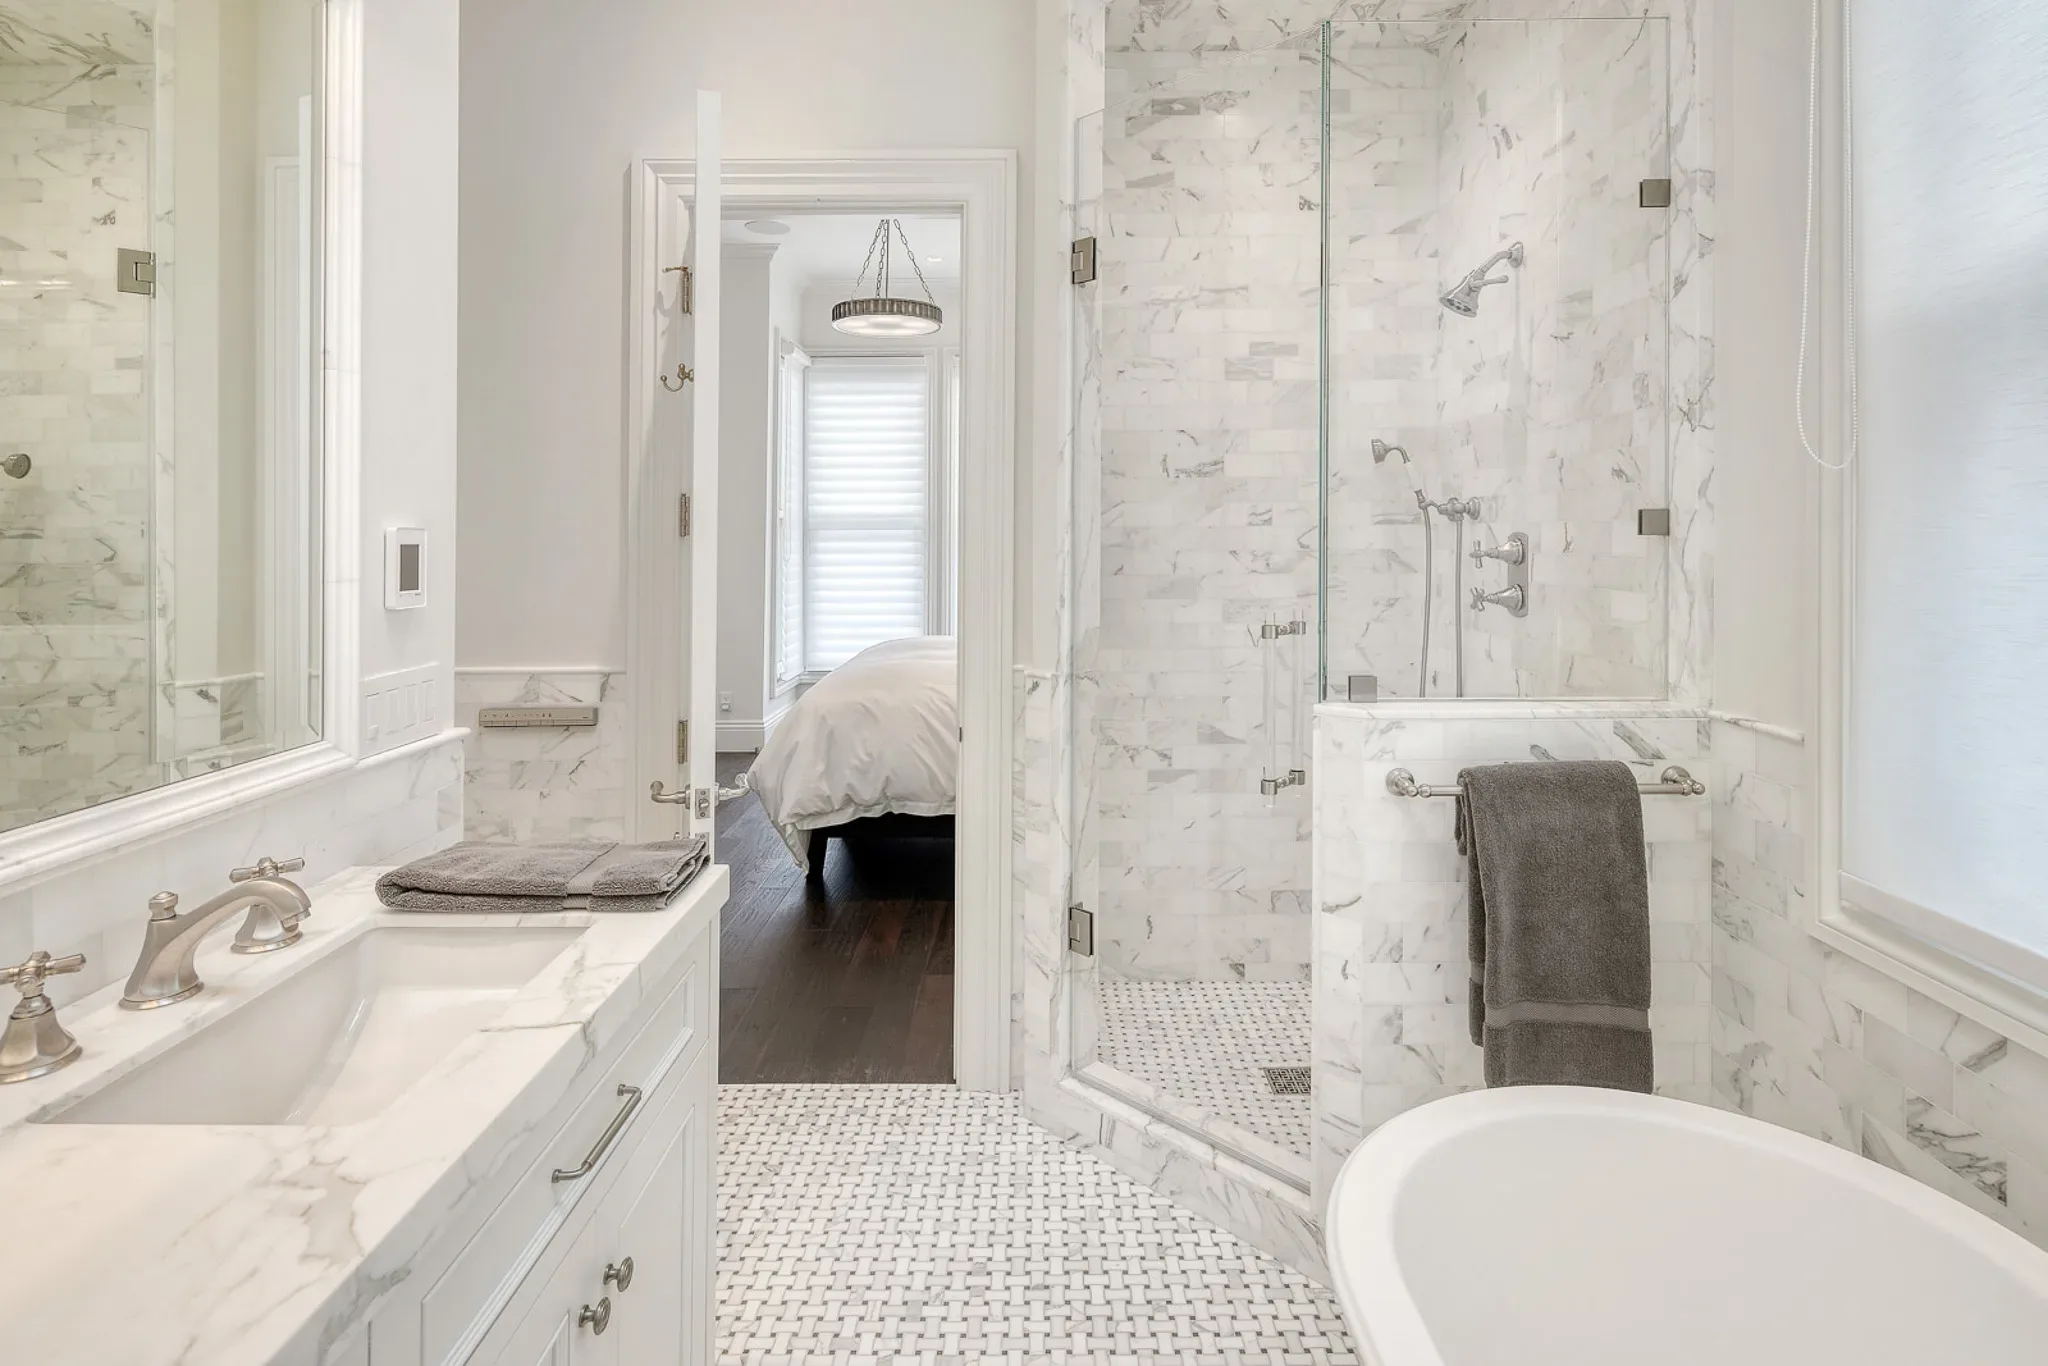 A white bathroom with marble floors and a glass shower.